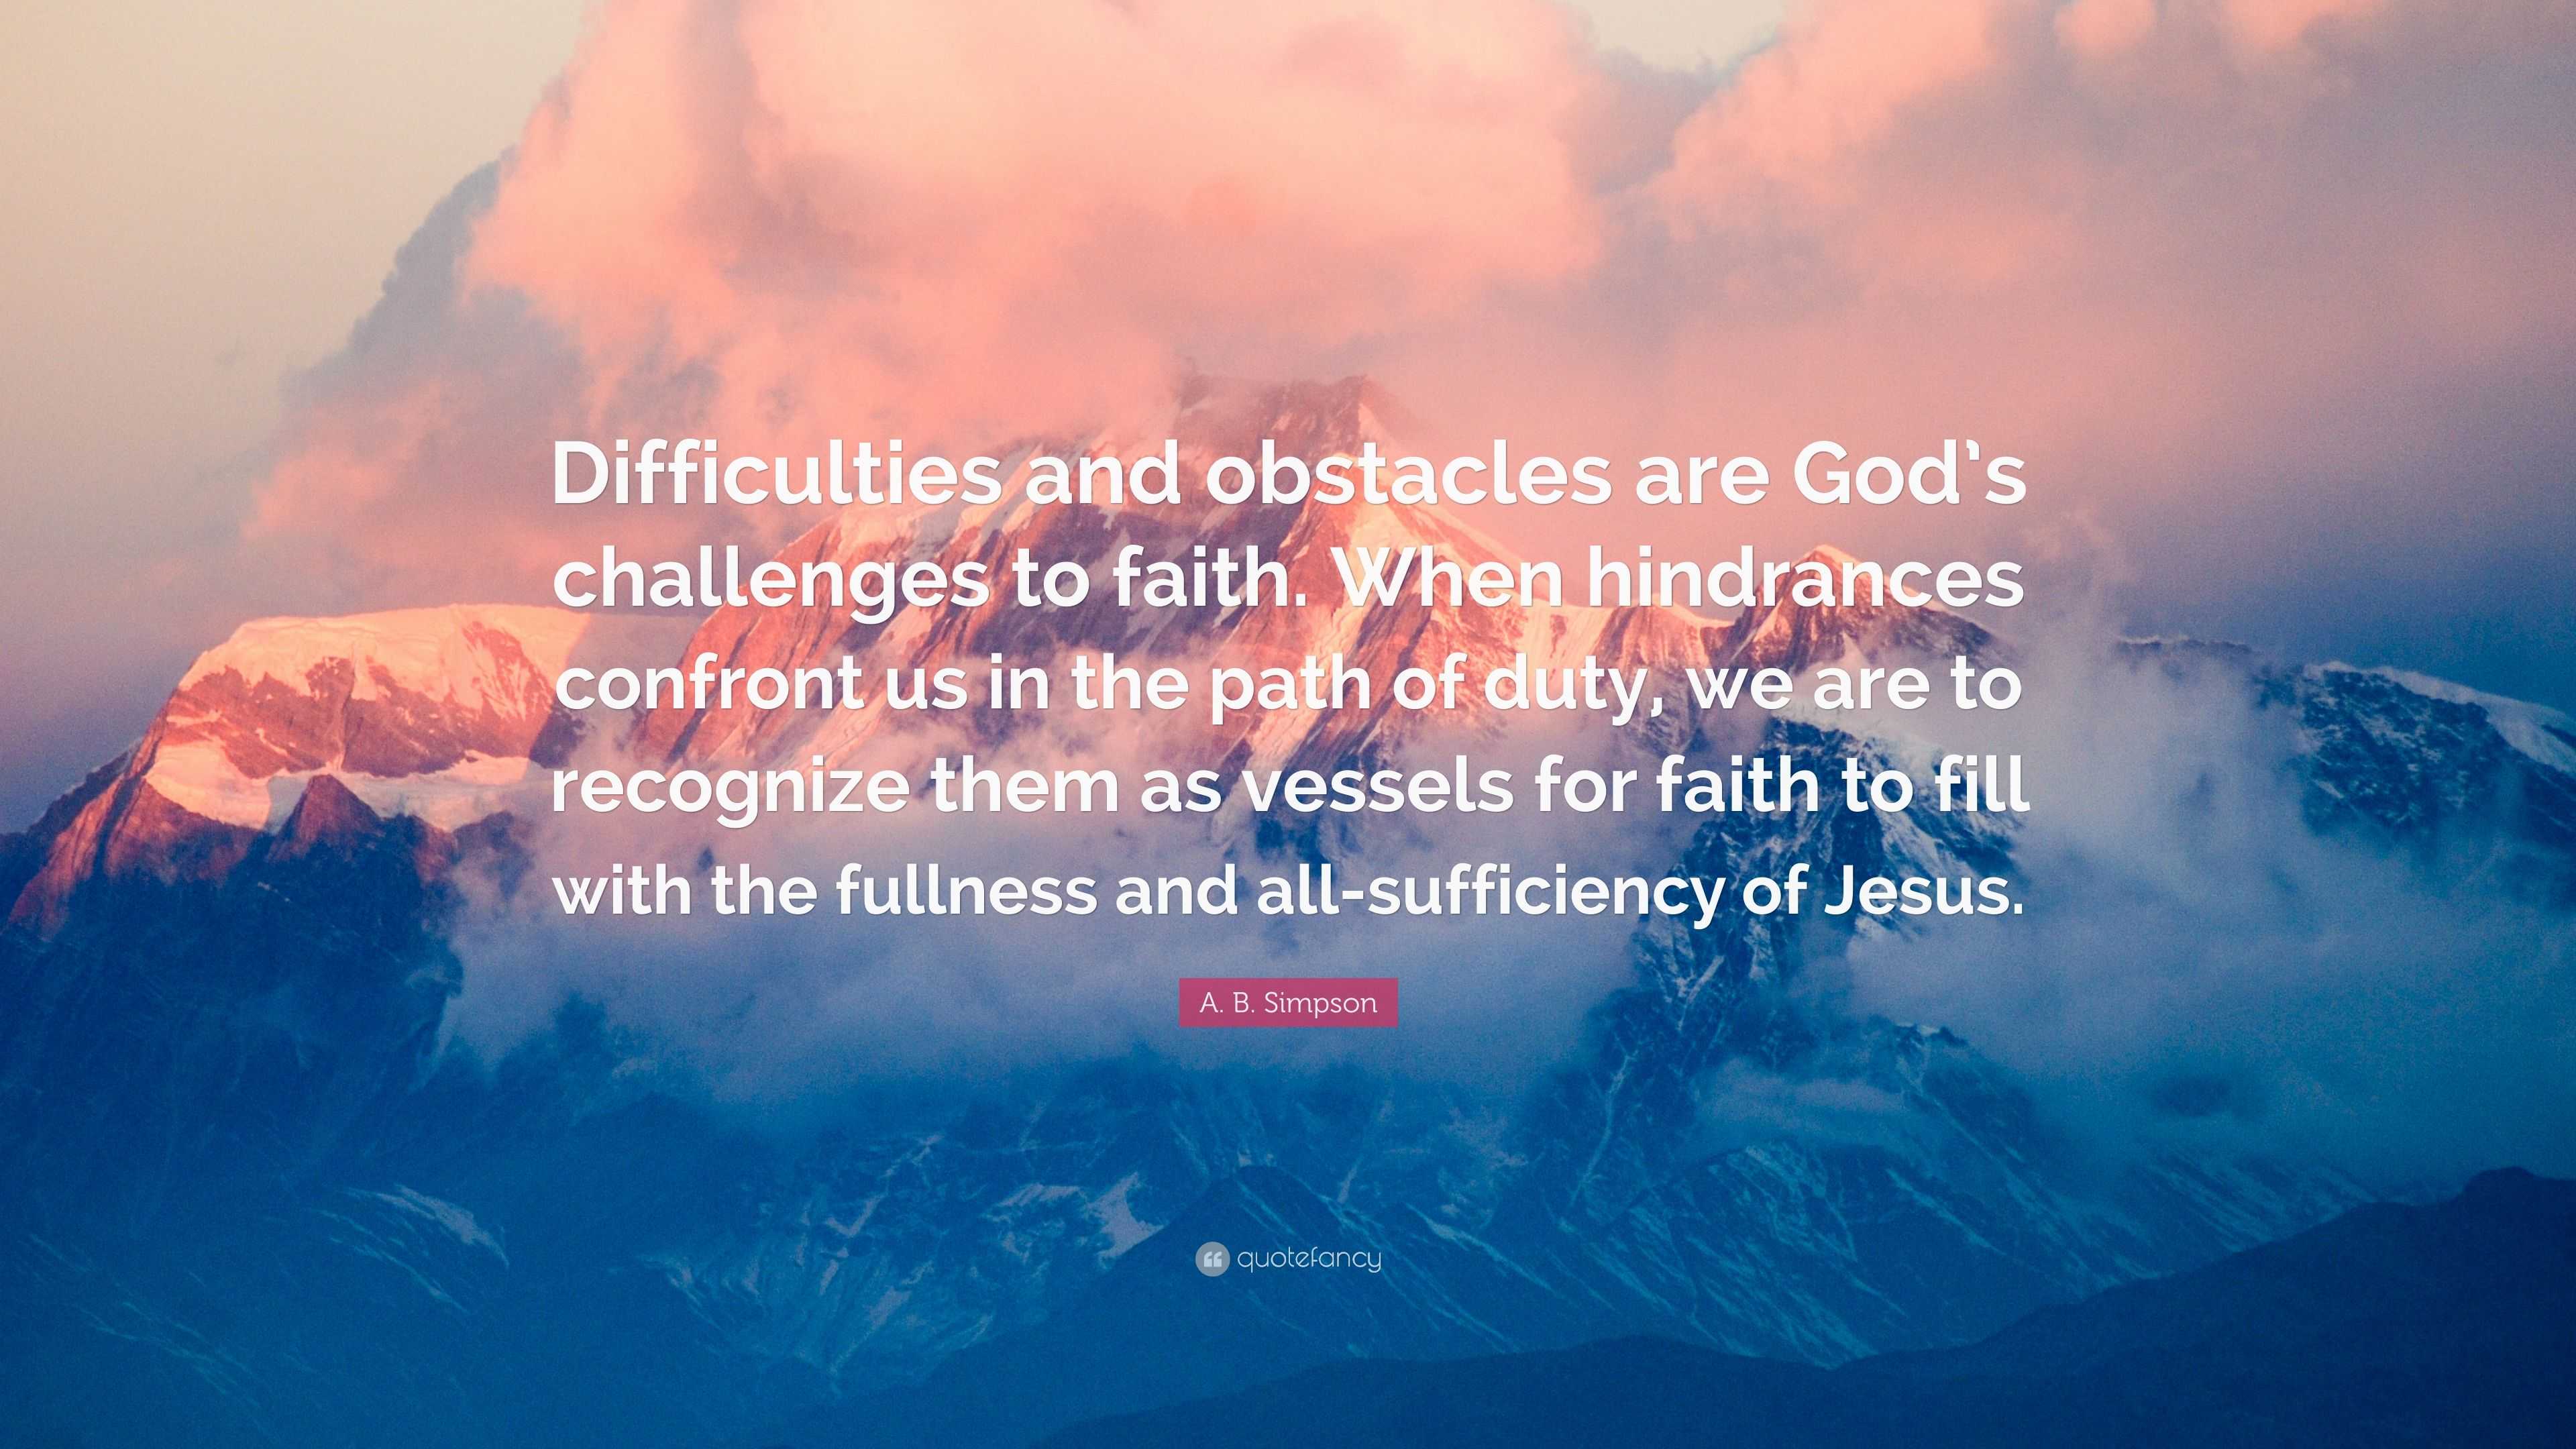 A. B. Simpson Quote: “Difficulties and obstacles are God’s challenges